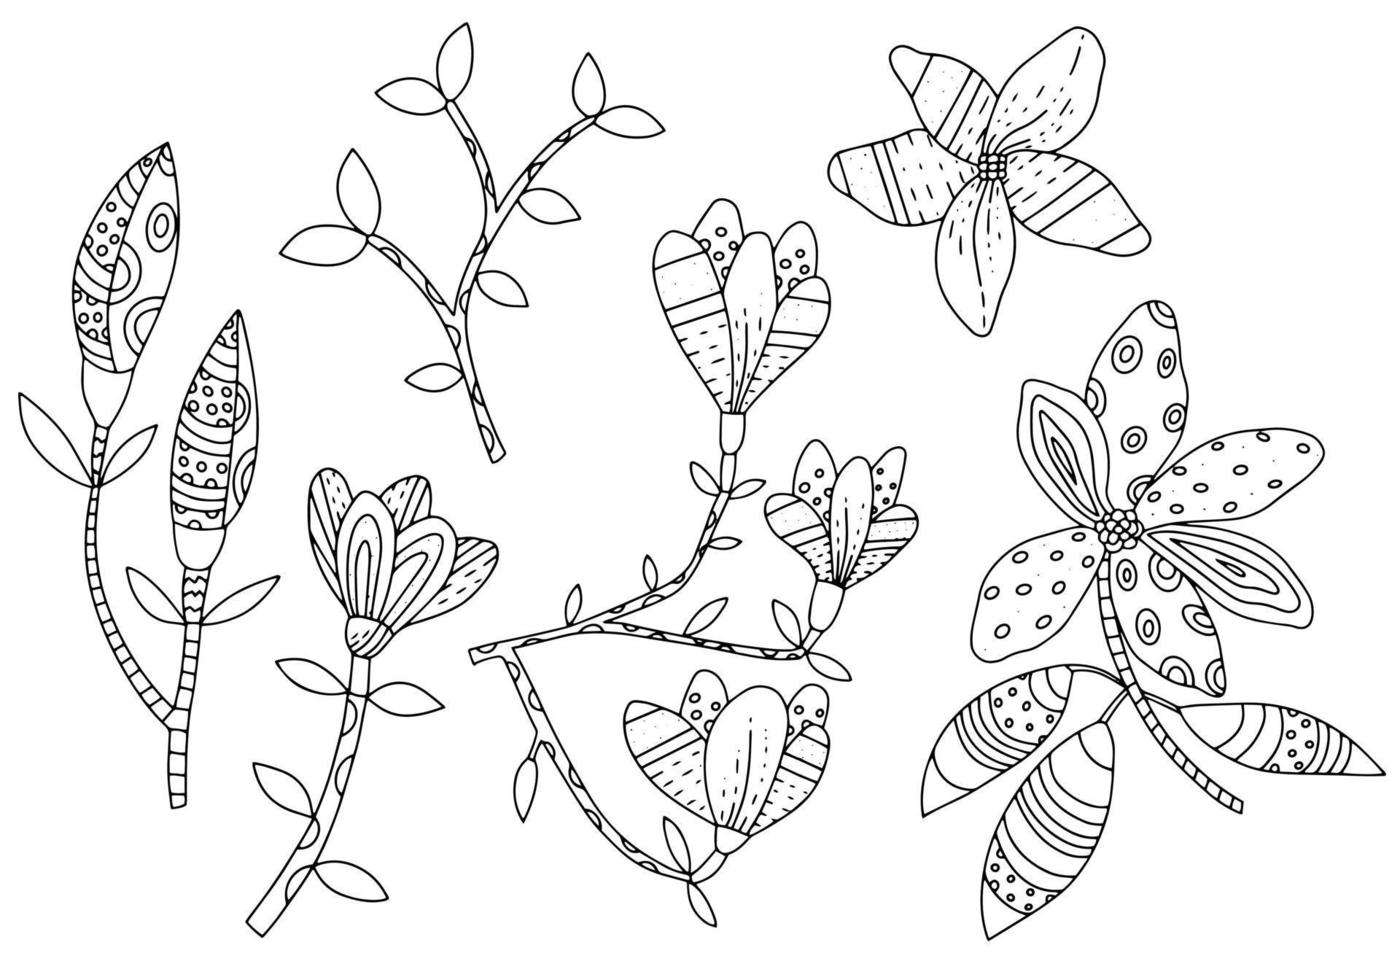 Magnolia flowers on branches with leaves. Set of botanical graphic elements in ethnic style. Hand drawn stylized plants vector